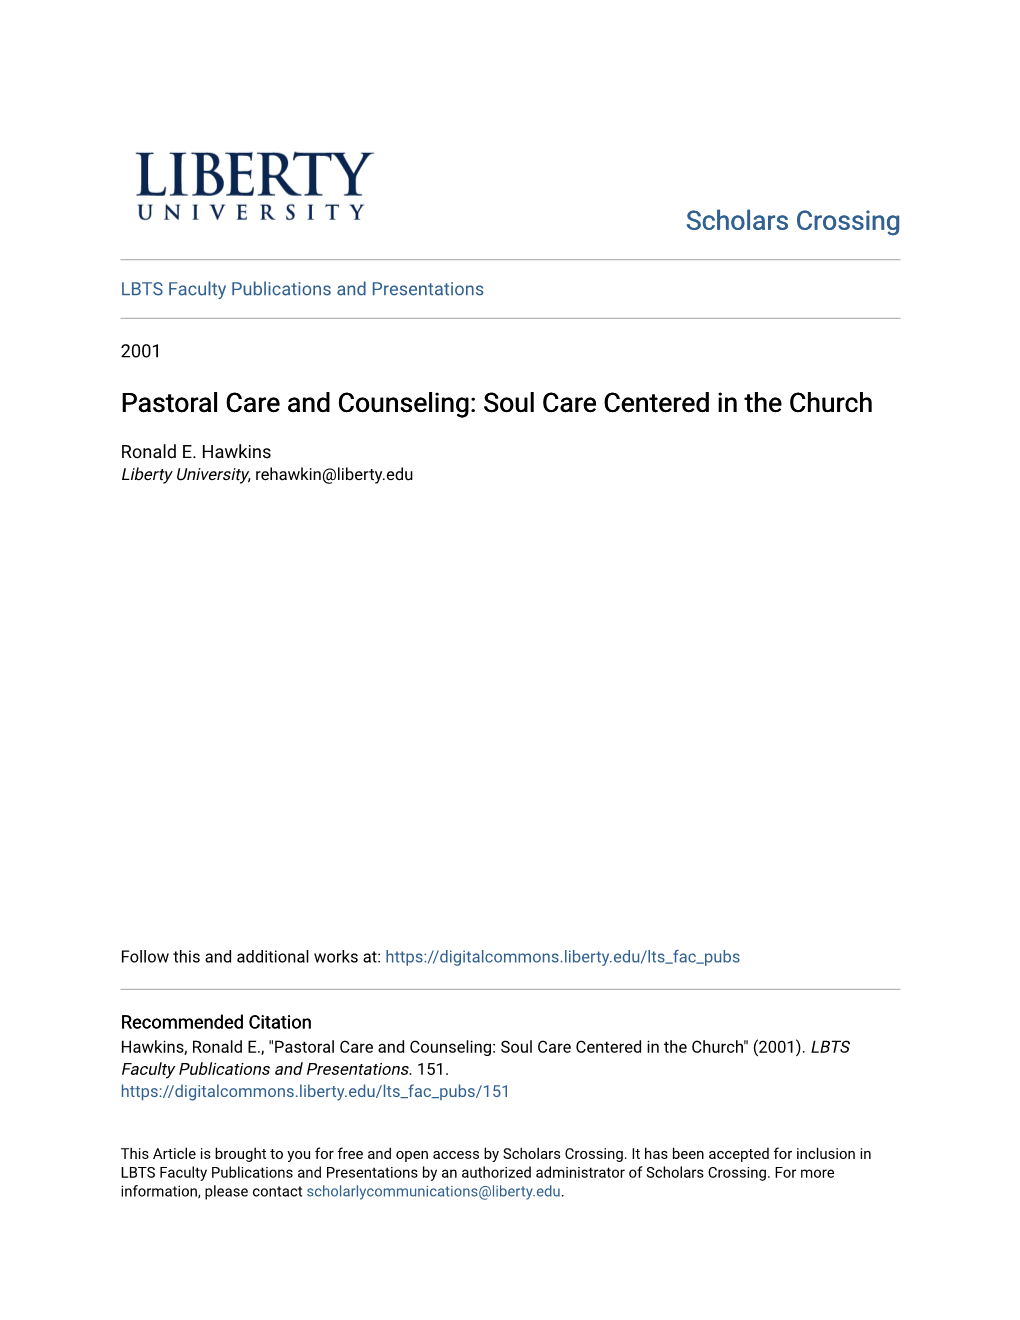 Pastoral Care and Counseling: Soul Care Centered in the Church